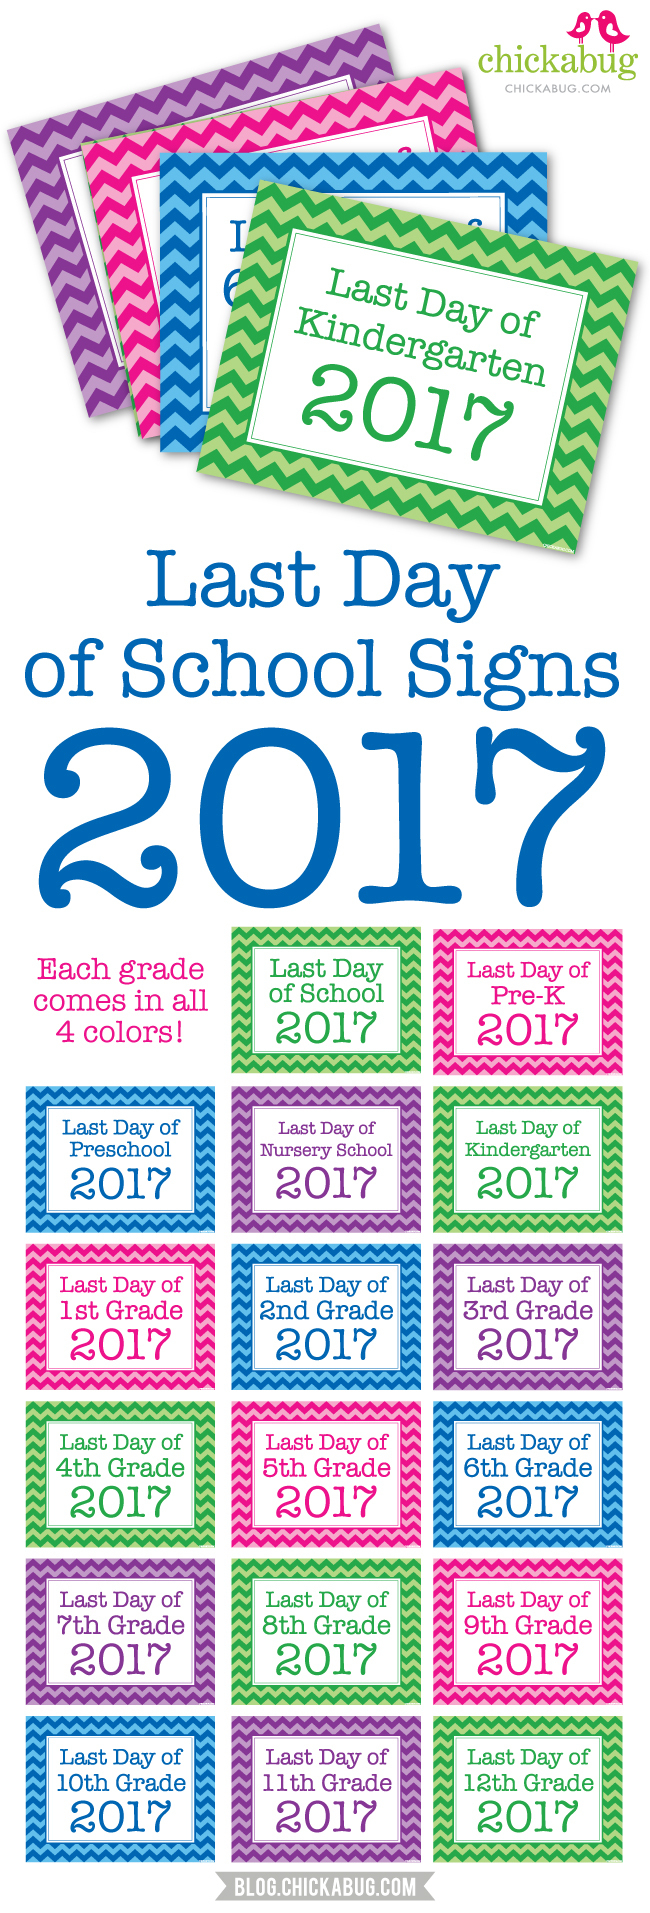 Free Printable Last Day Of School Signs 2017 | Chickabug - Free Printable First Day Of School Signs 2017